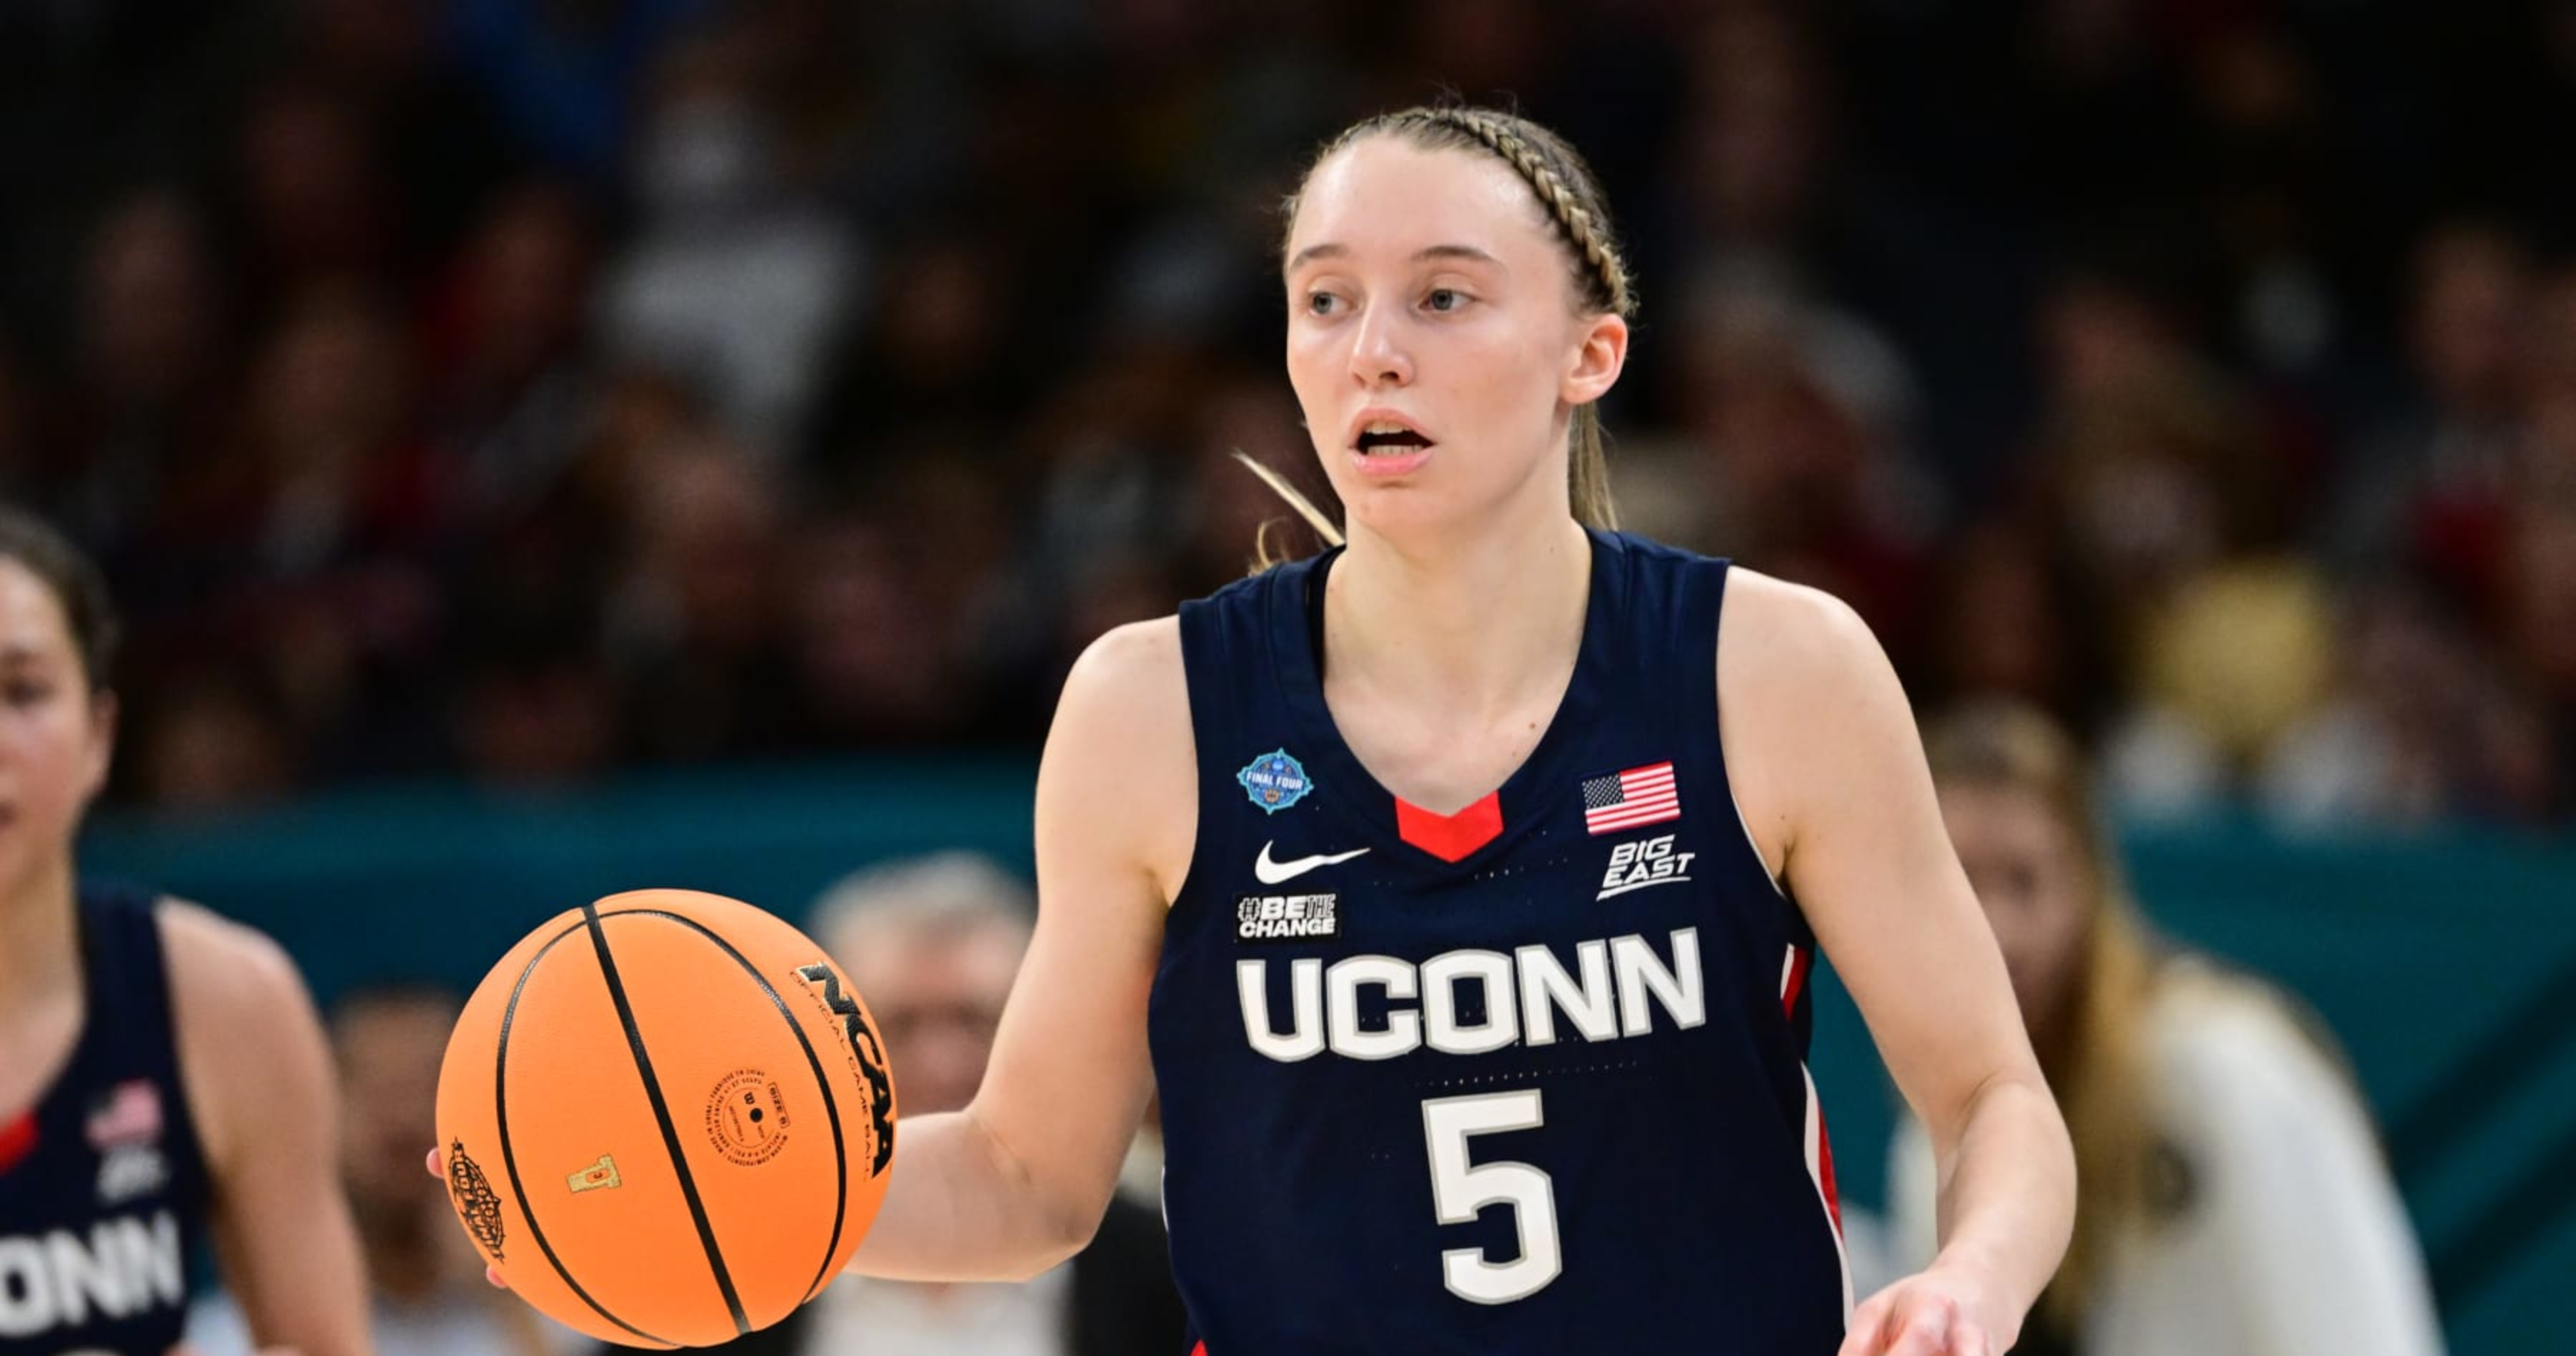 UConn's Paige Bueckers Tears ACL, Will Miss 2022-23 Season with Knee ...